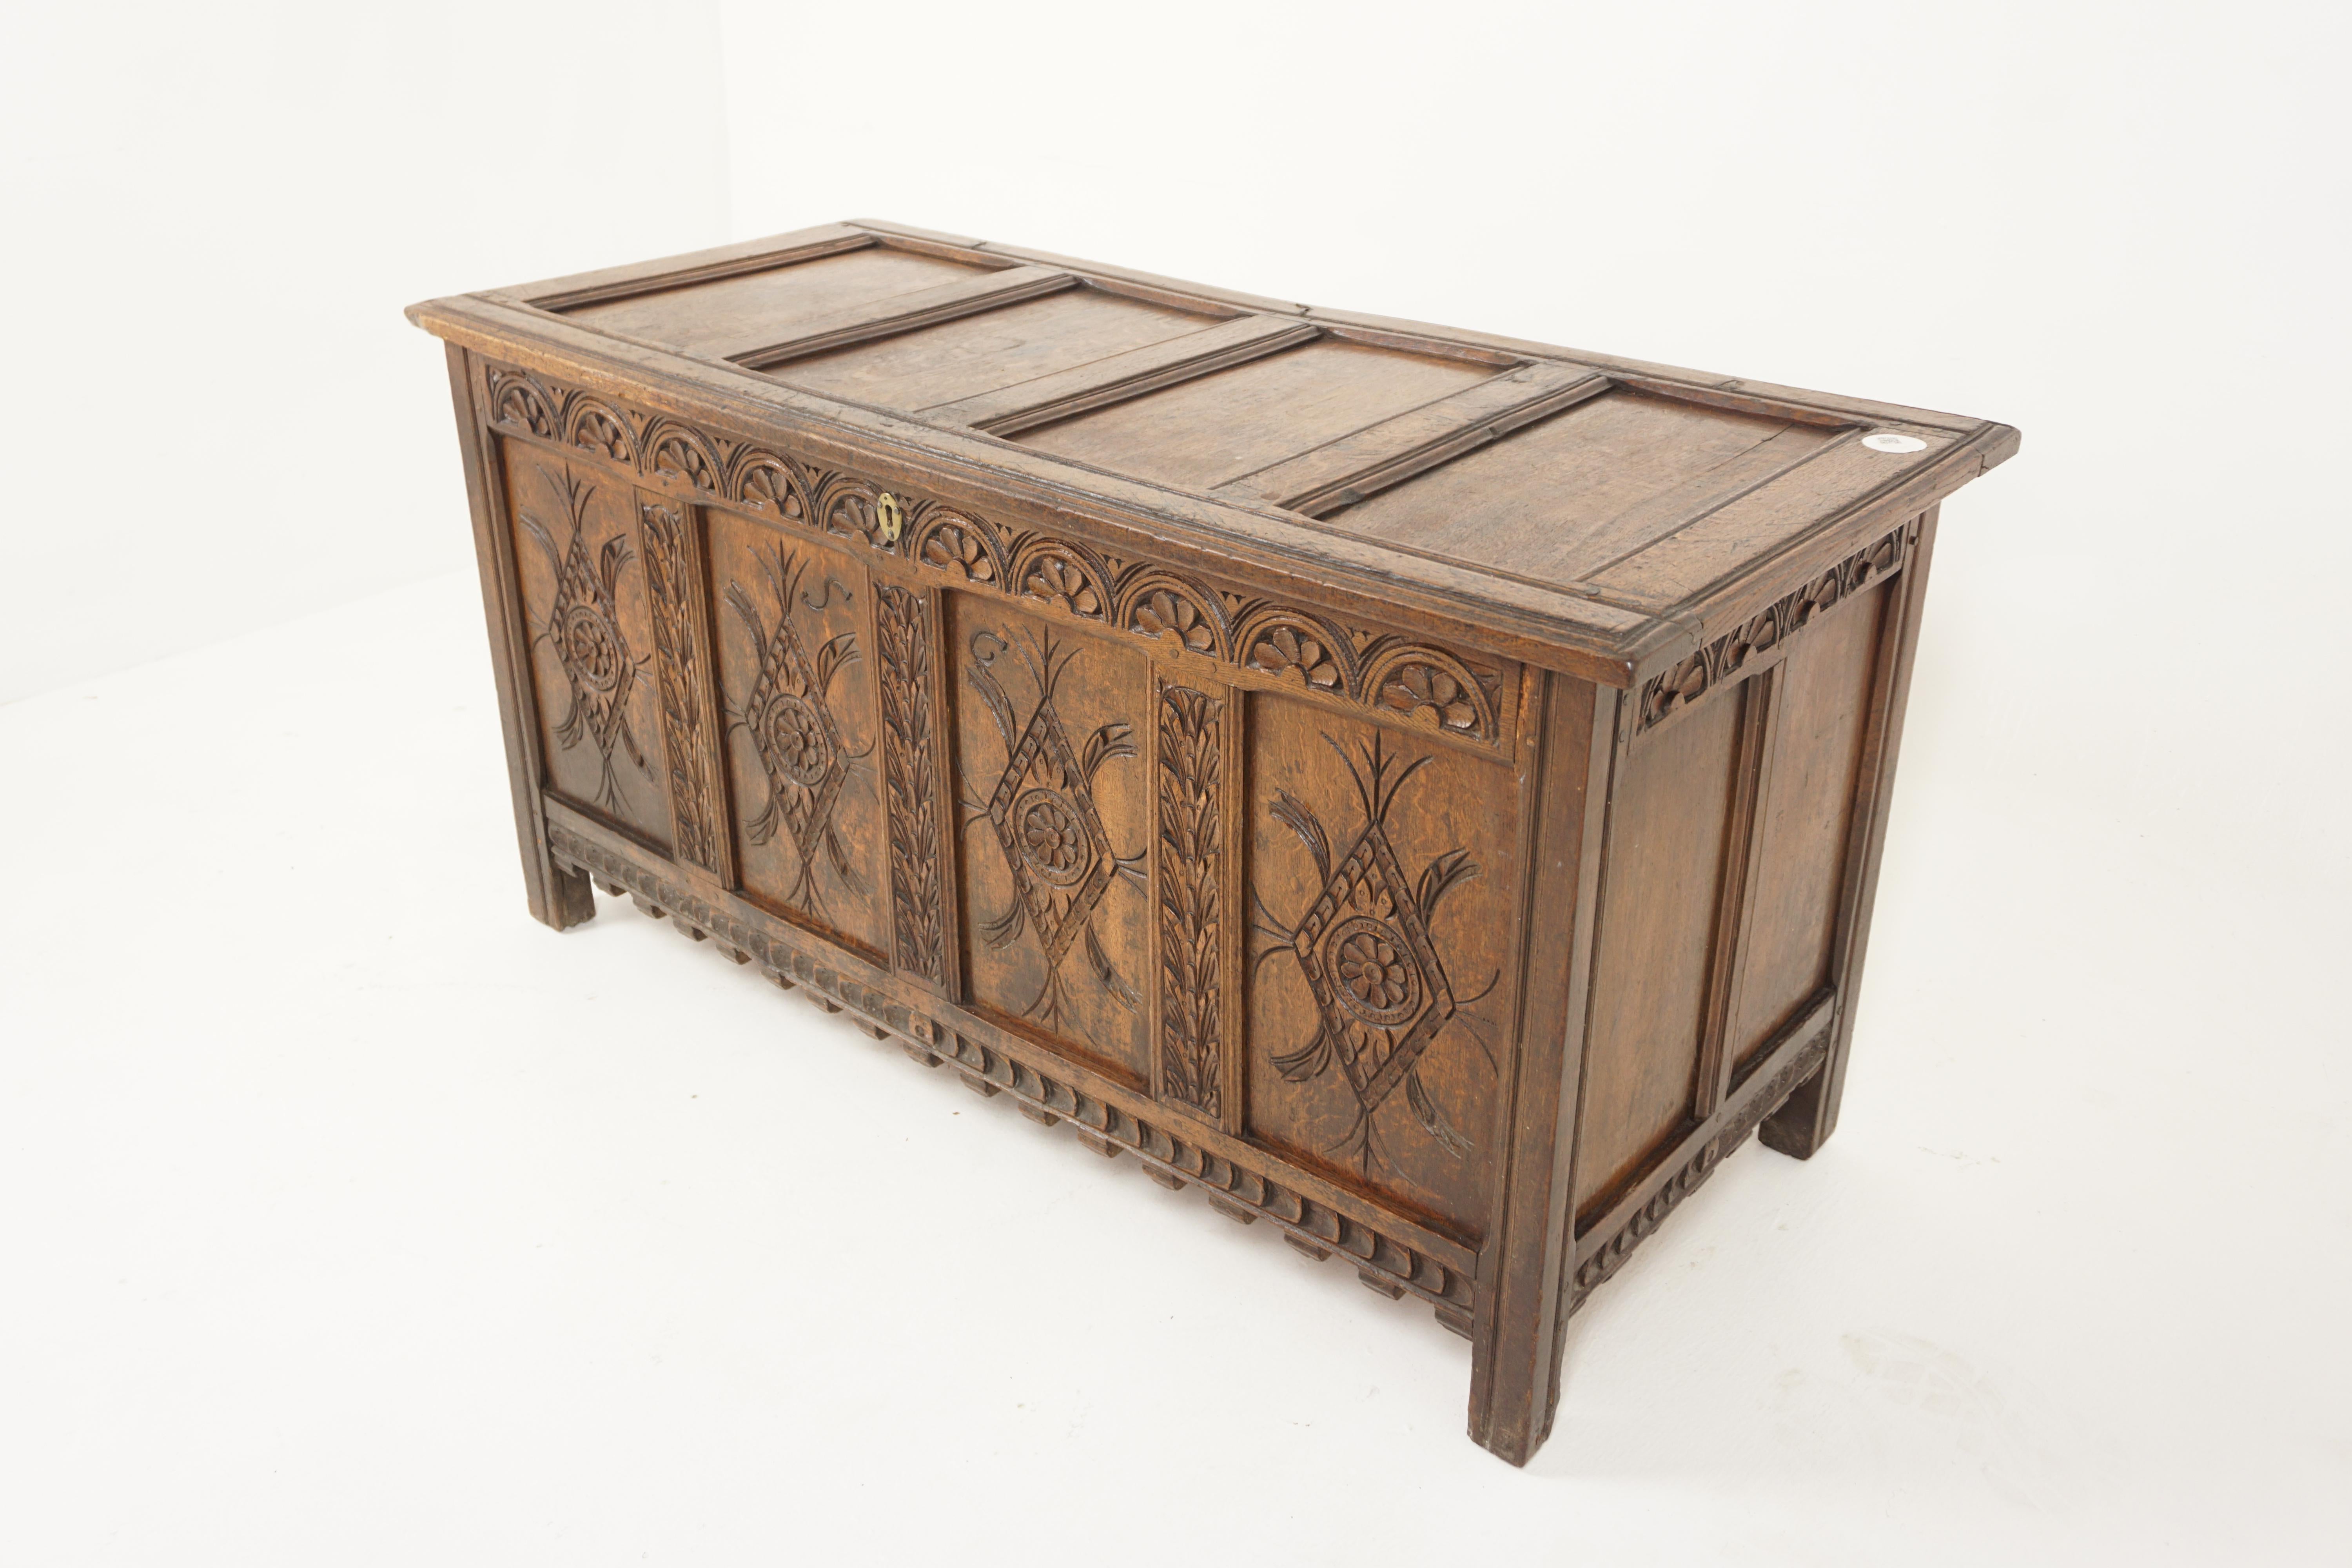 18th carved oak panelled coffer, trunk, chest, freestanding, Scotland 1780, H666

Scotland 1780
Solid Oak 
Original Finish
Four Panelled Top
Top lifts to reveal large storage space
Original wire hinges
Carved frieze below on front and sides
Four